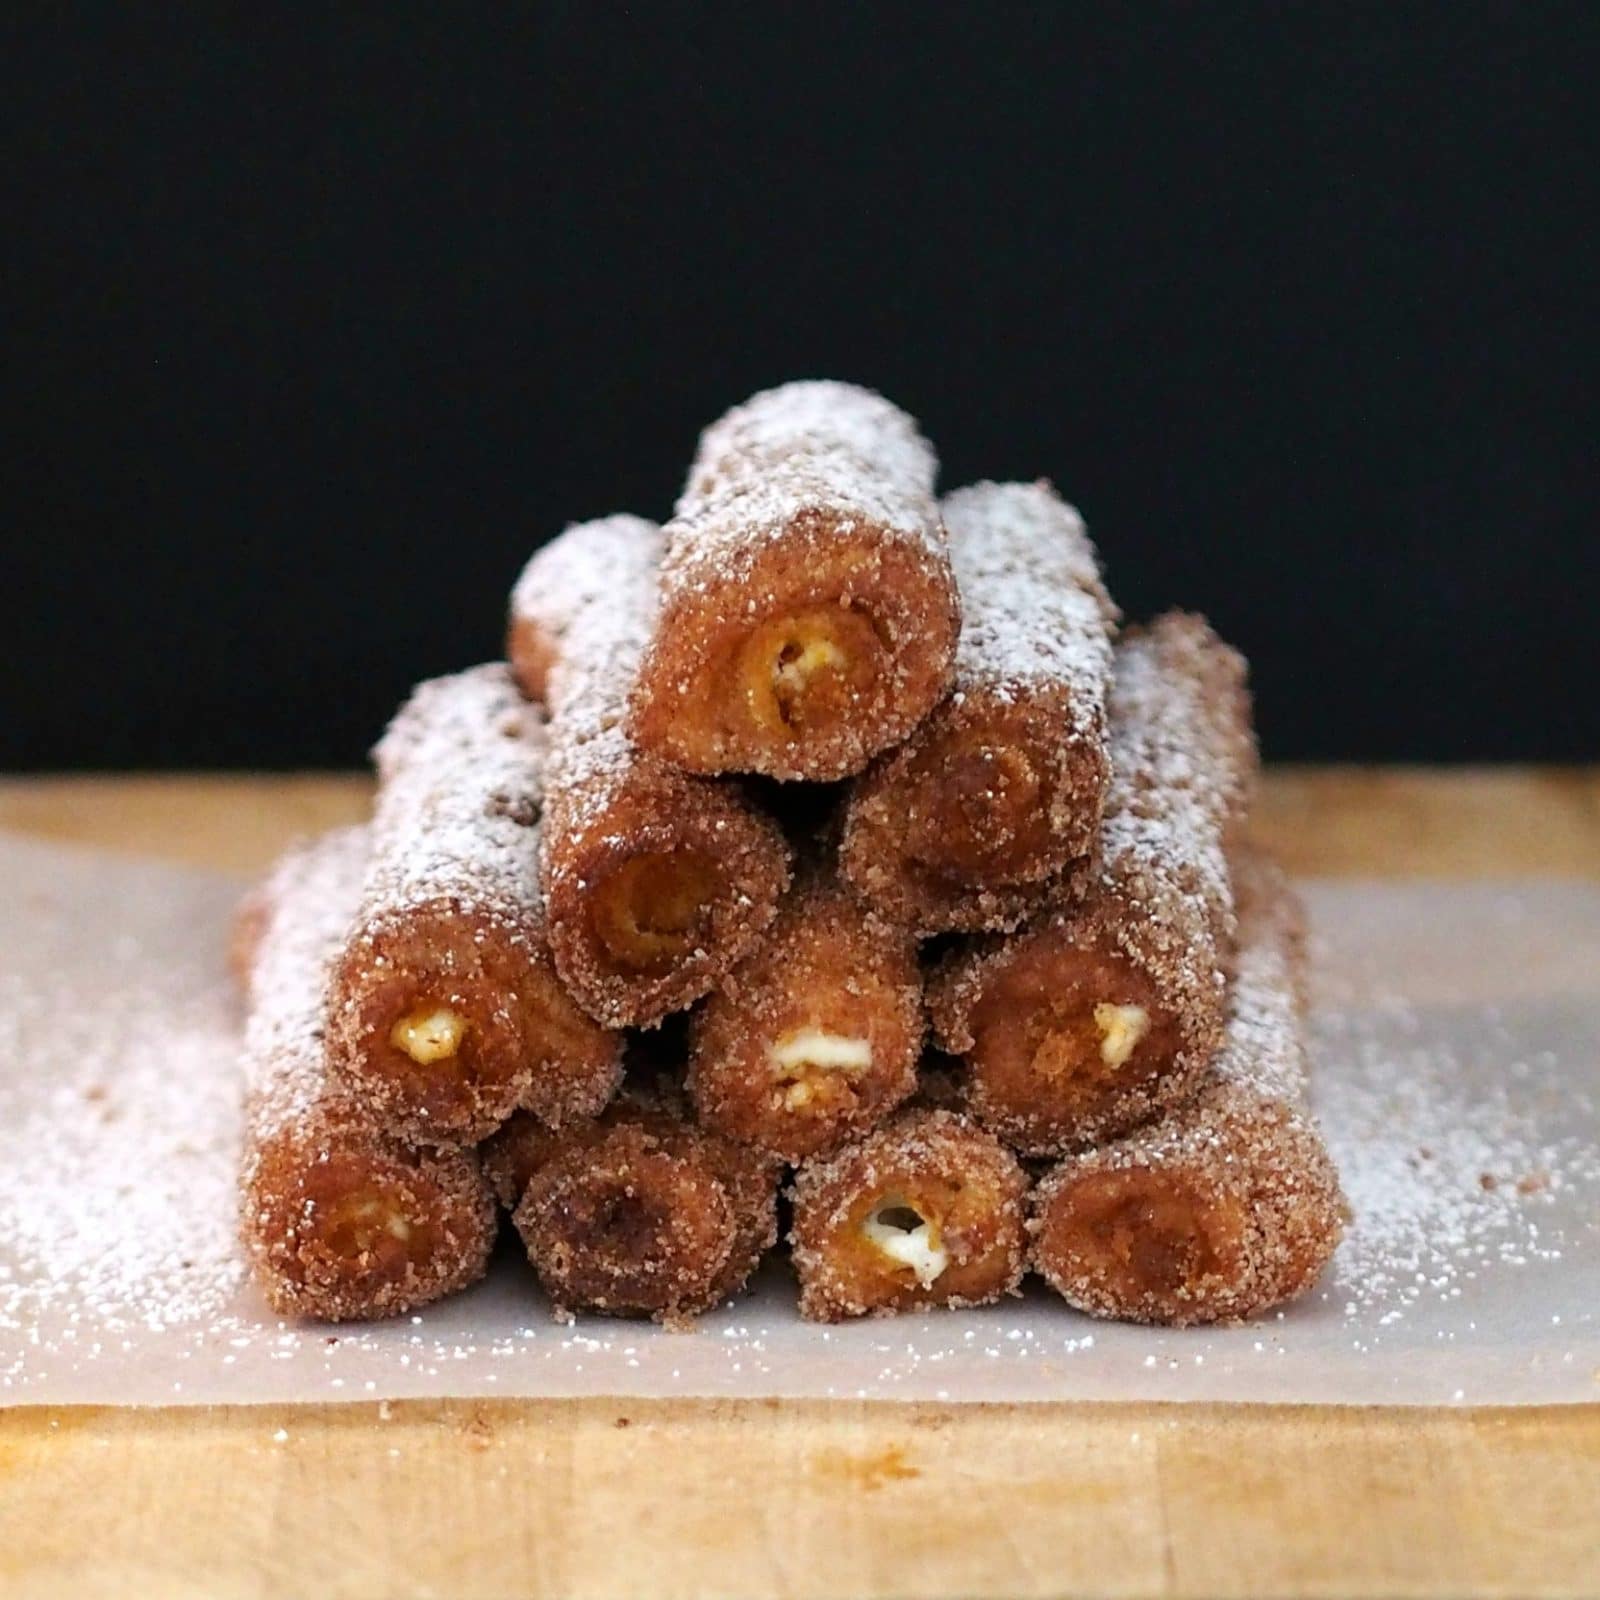 Pumpkin French Toast Roll-ups are an easy & fun way to satisfy your cinnamon cravings. simplysated